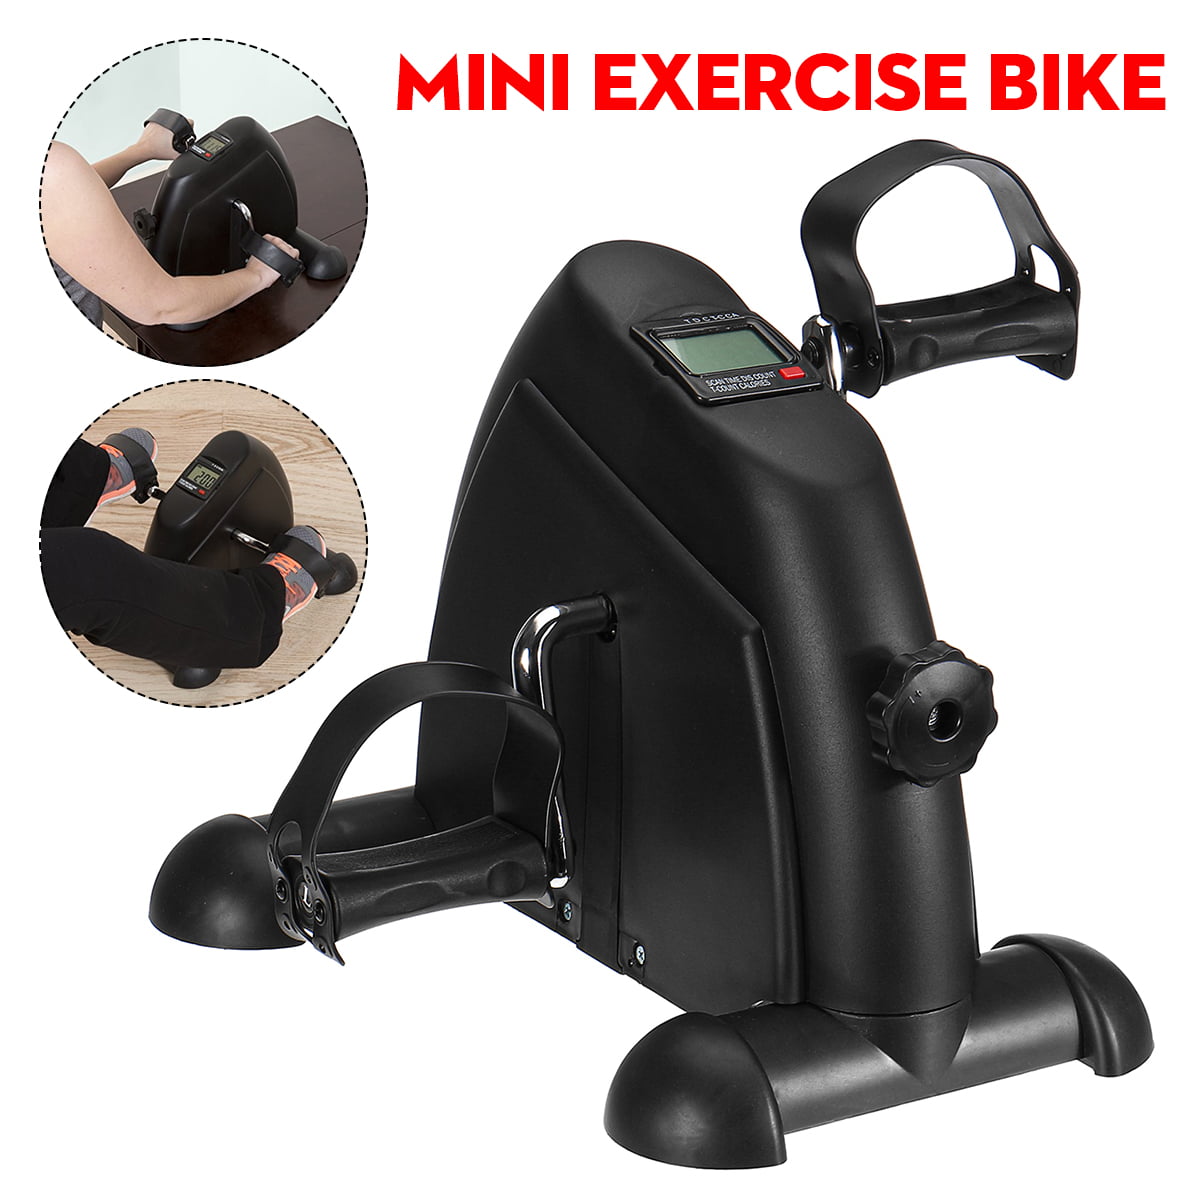 YOUSIS Pedal Exerciser Portable Mini Exercise Bike Home Leg Arm Exercise Equipment with LCD Display Adjustable Resistance for Fitness Cardio Training